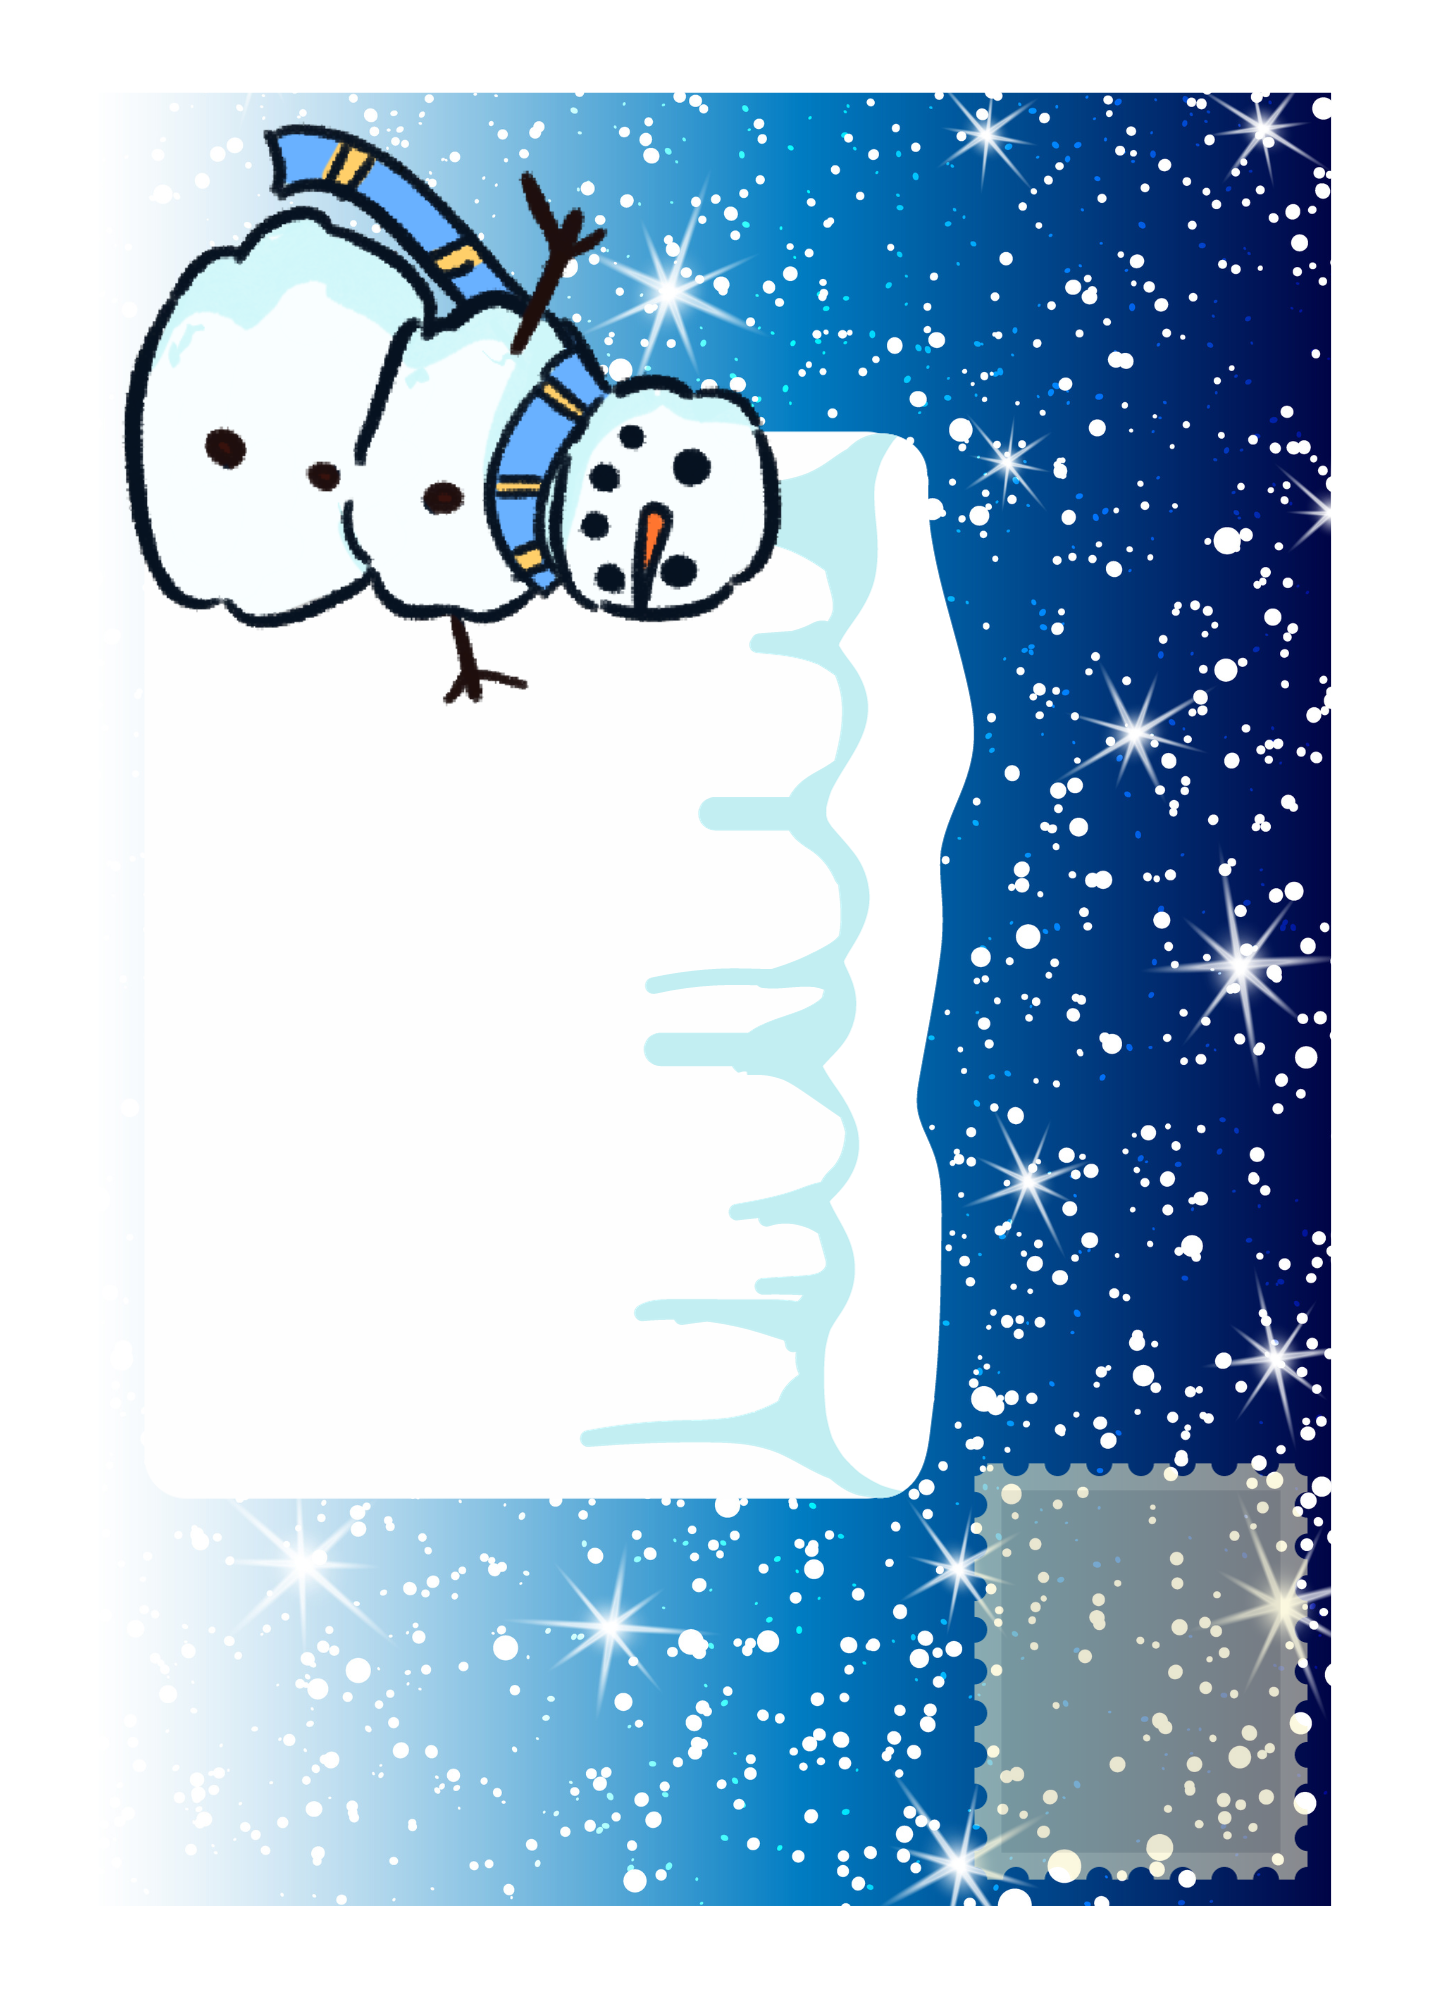 Snowman Christmas Card front of posting page featuring a blue sparkly background and a snowman with a blue and yellow striped scarf. There is a place to write addressee and place stamp indicated.